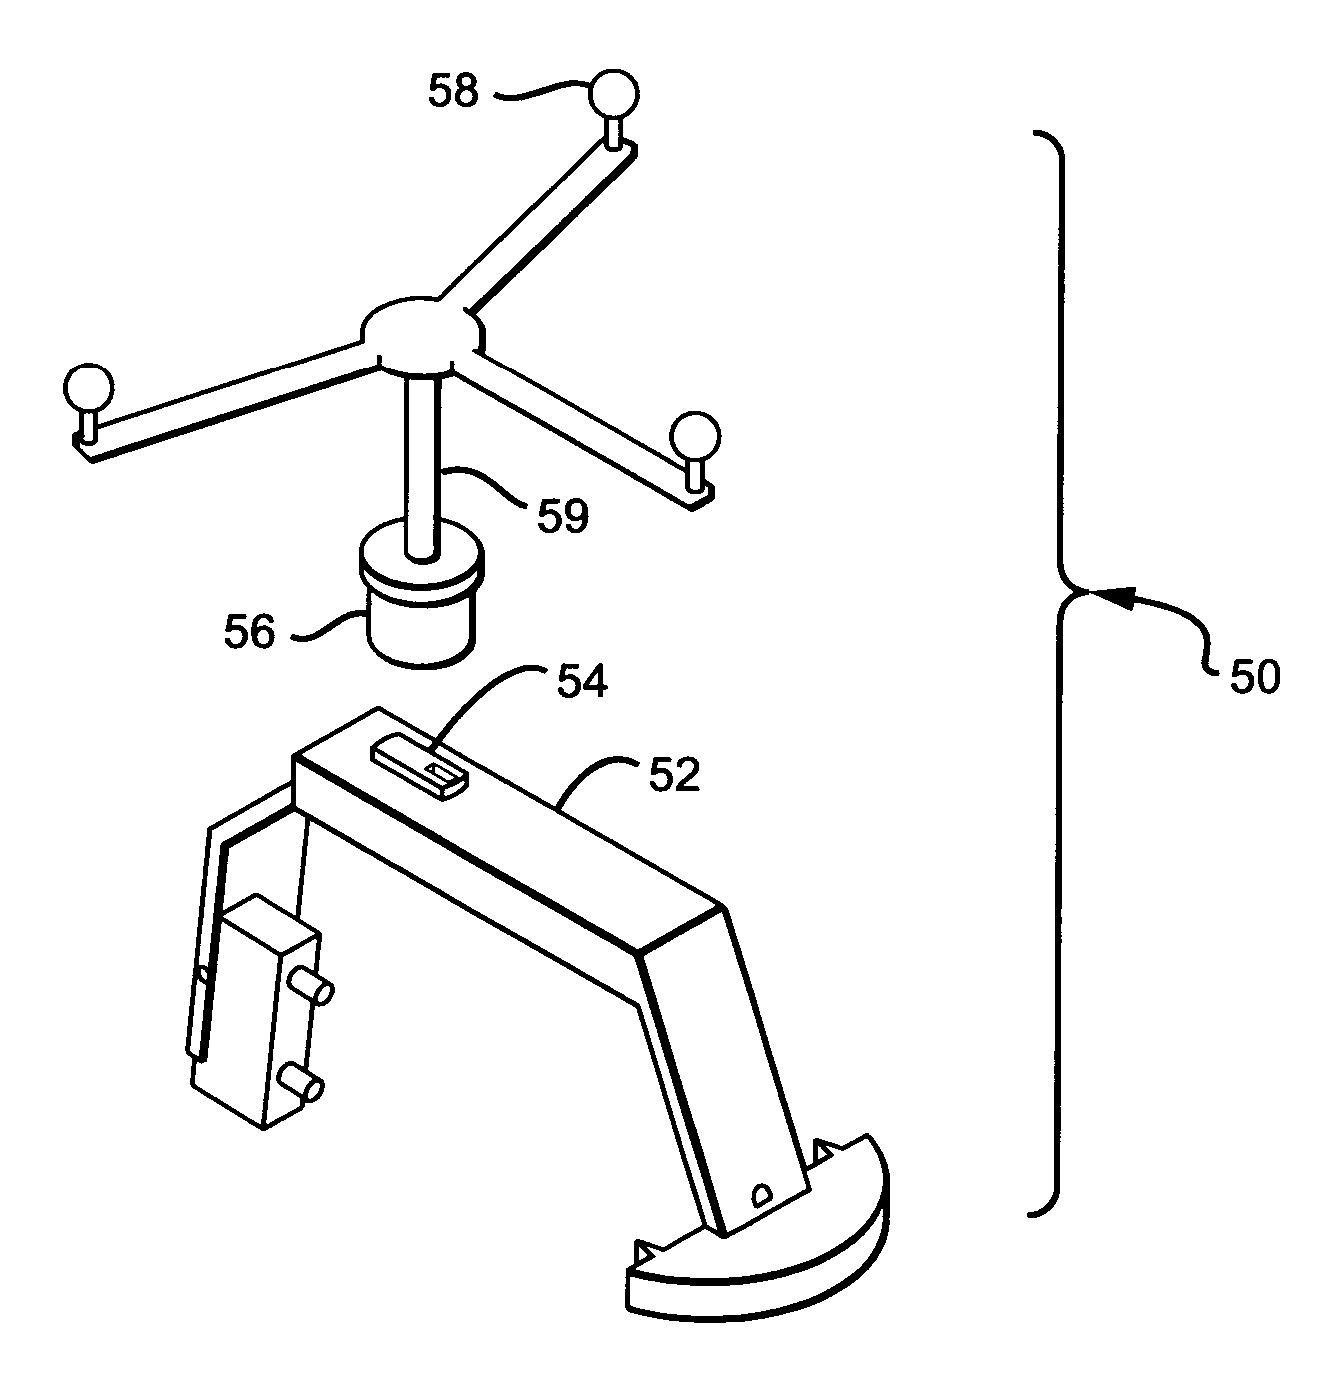 Non-imaging tracking tools and method for hip replacement surgery